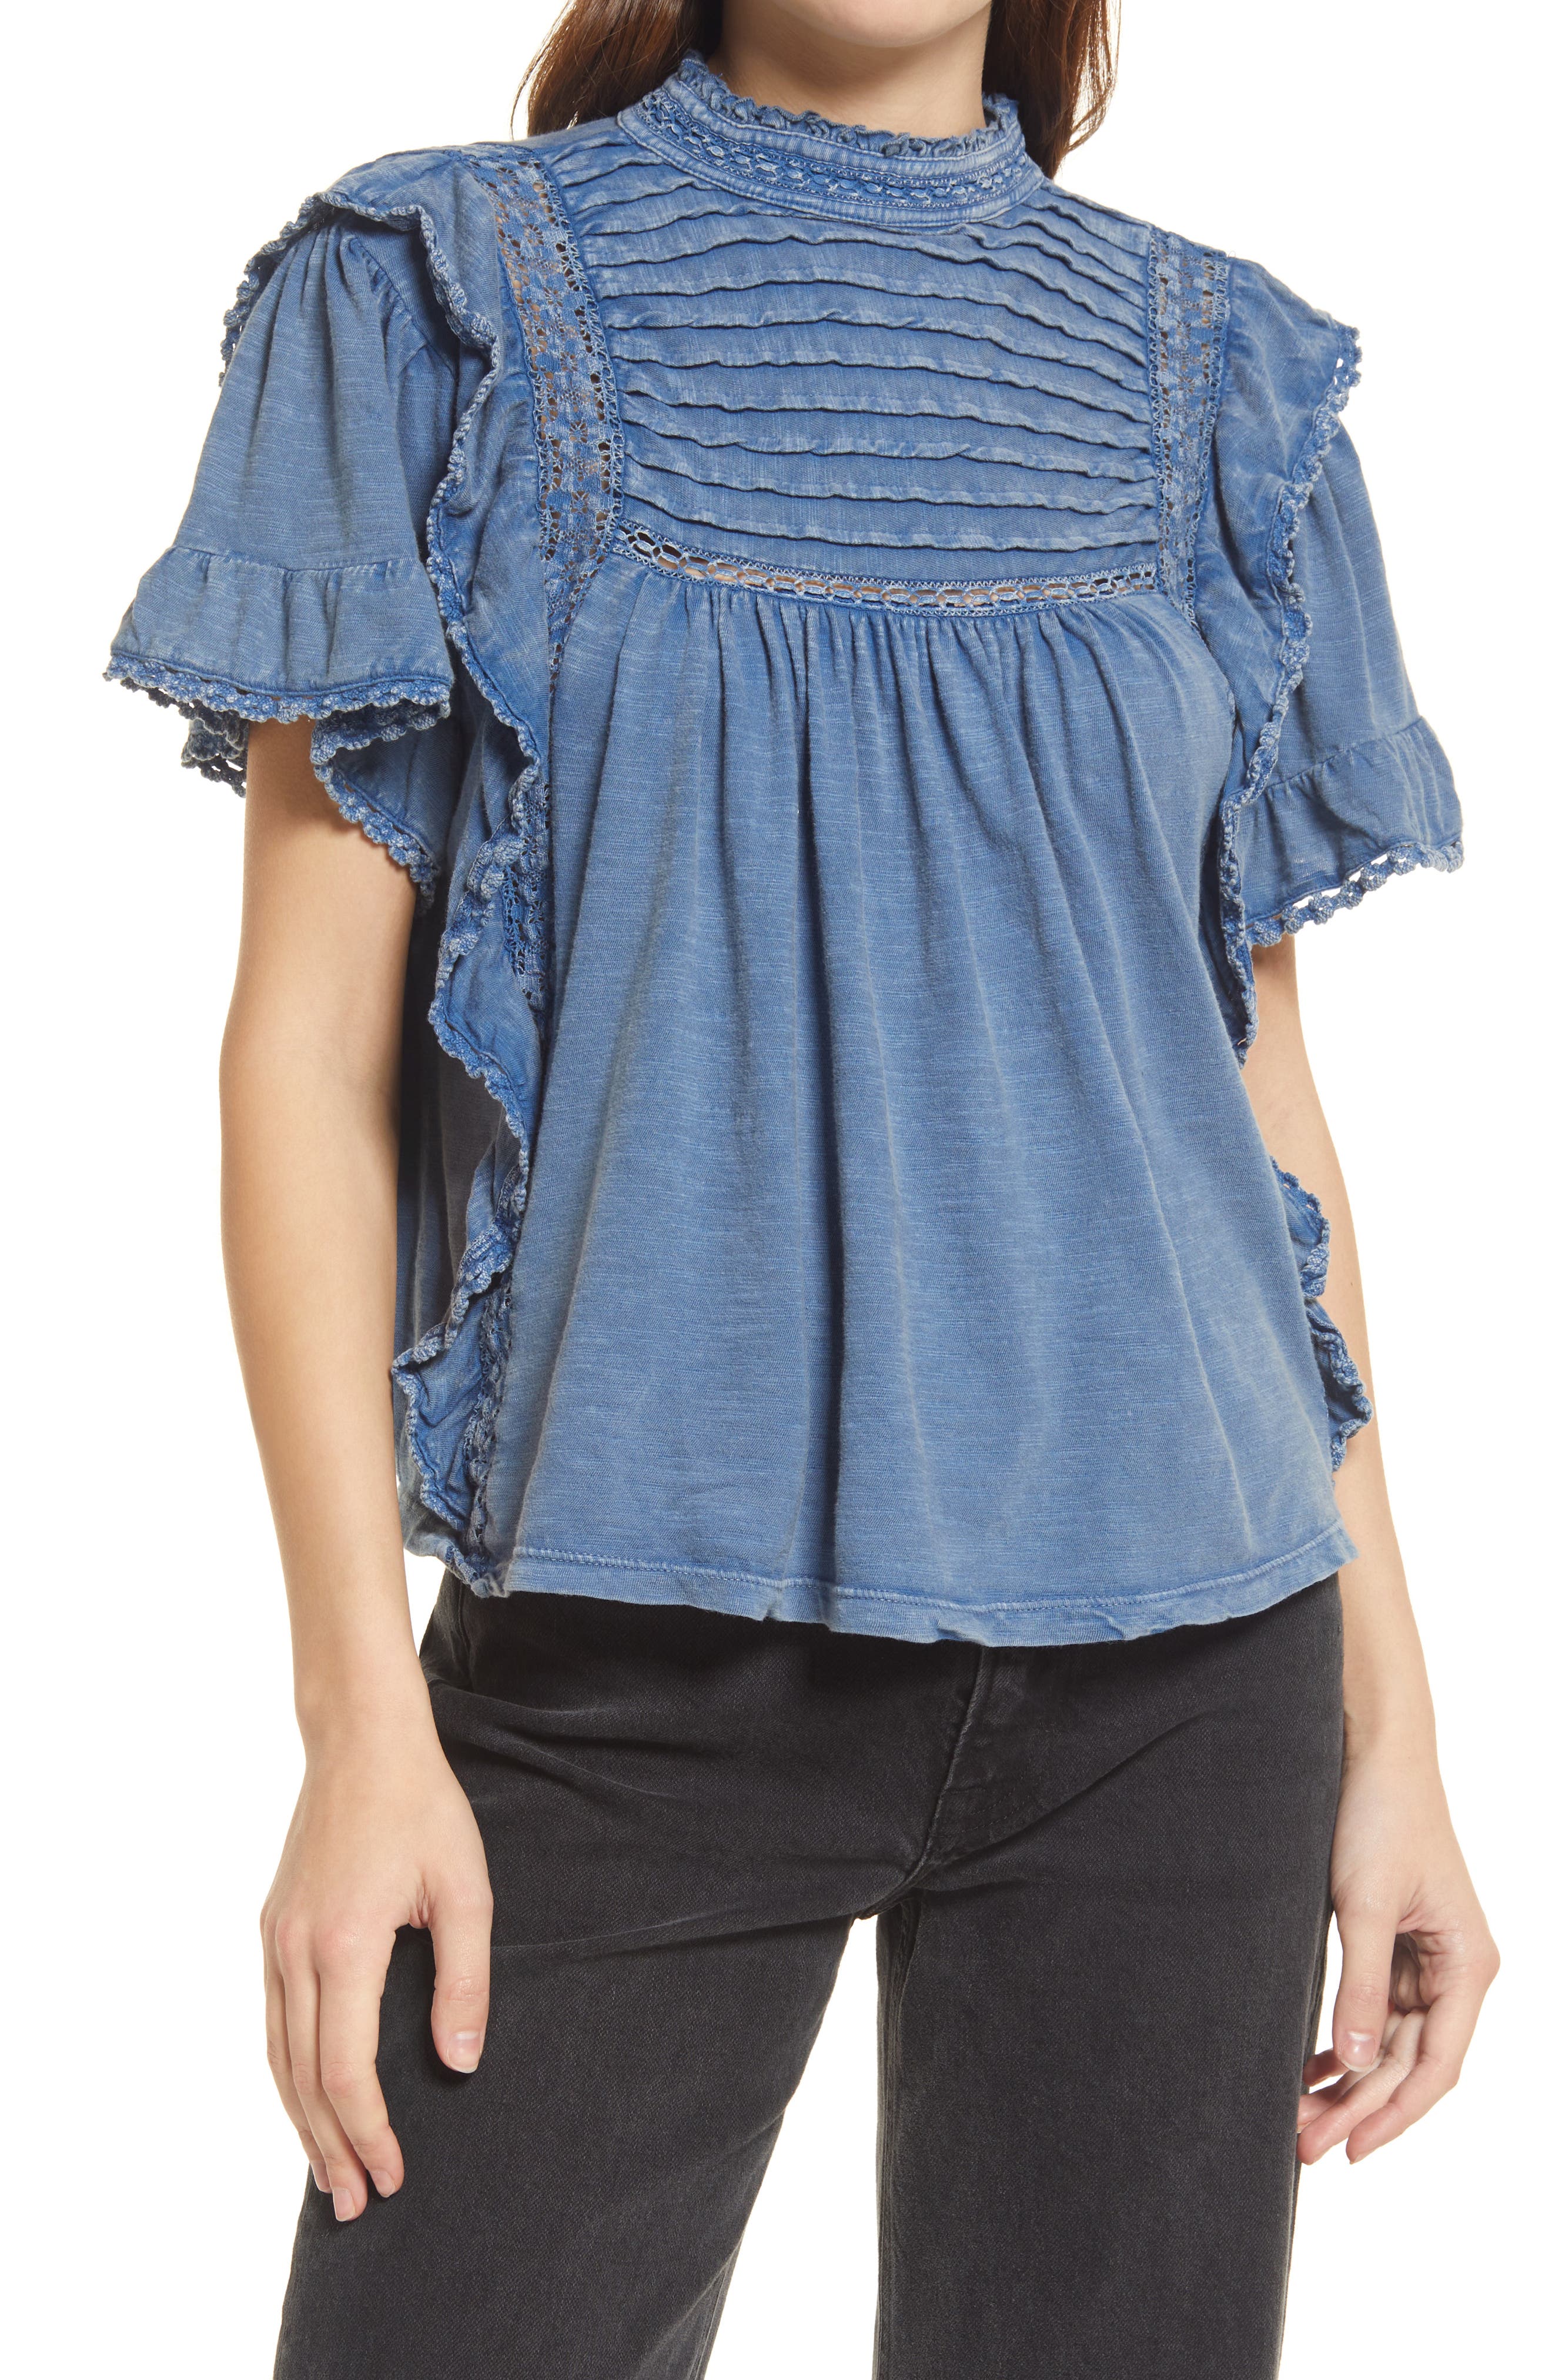 Free People Le Femme Top in Eventide